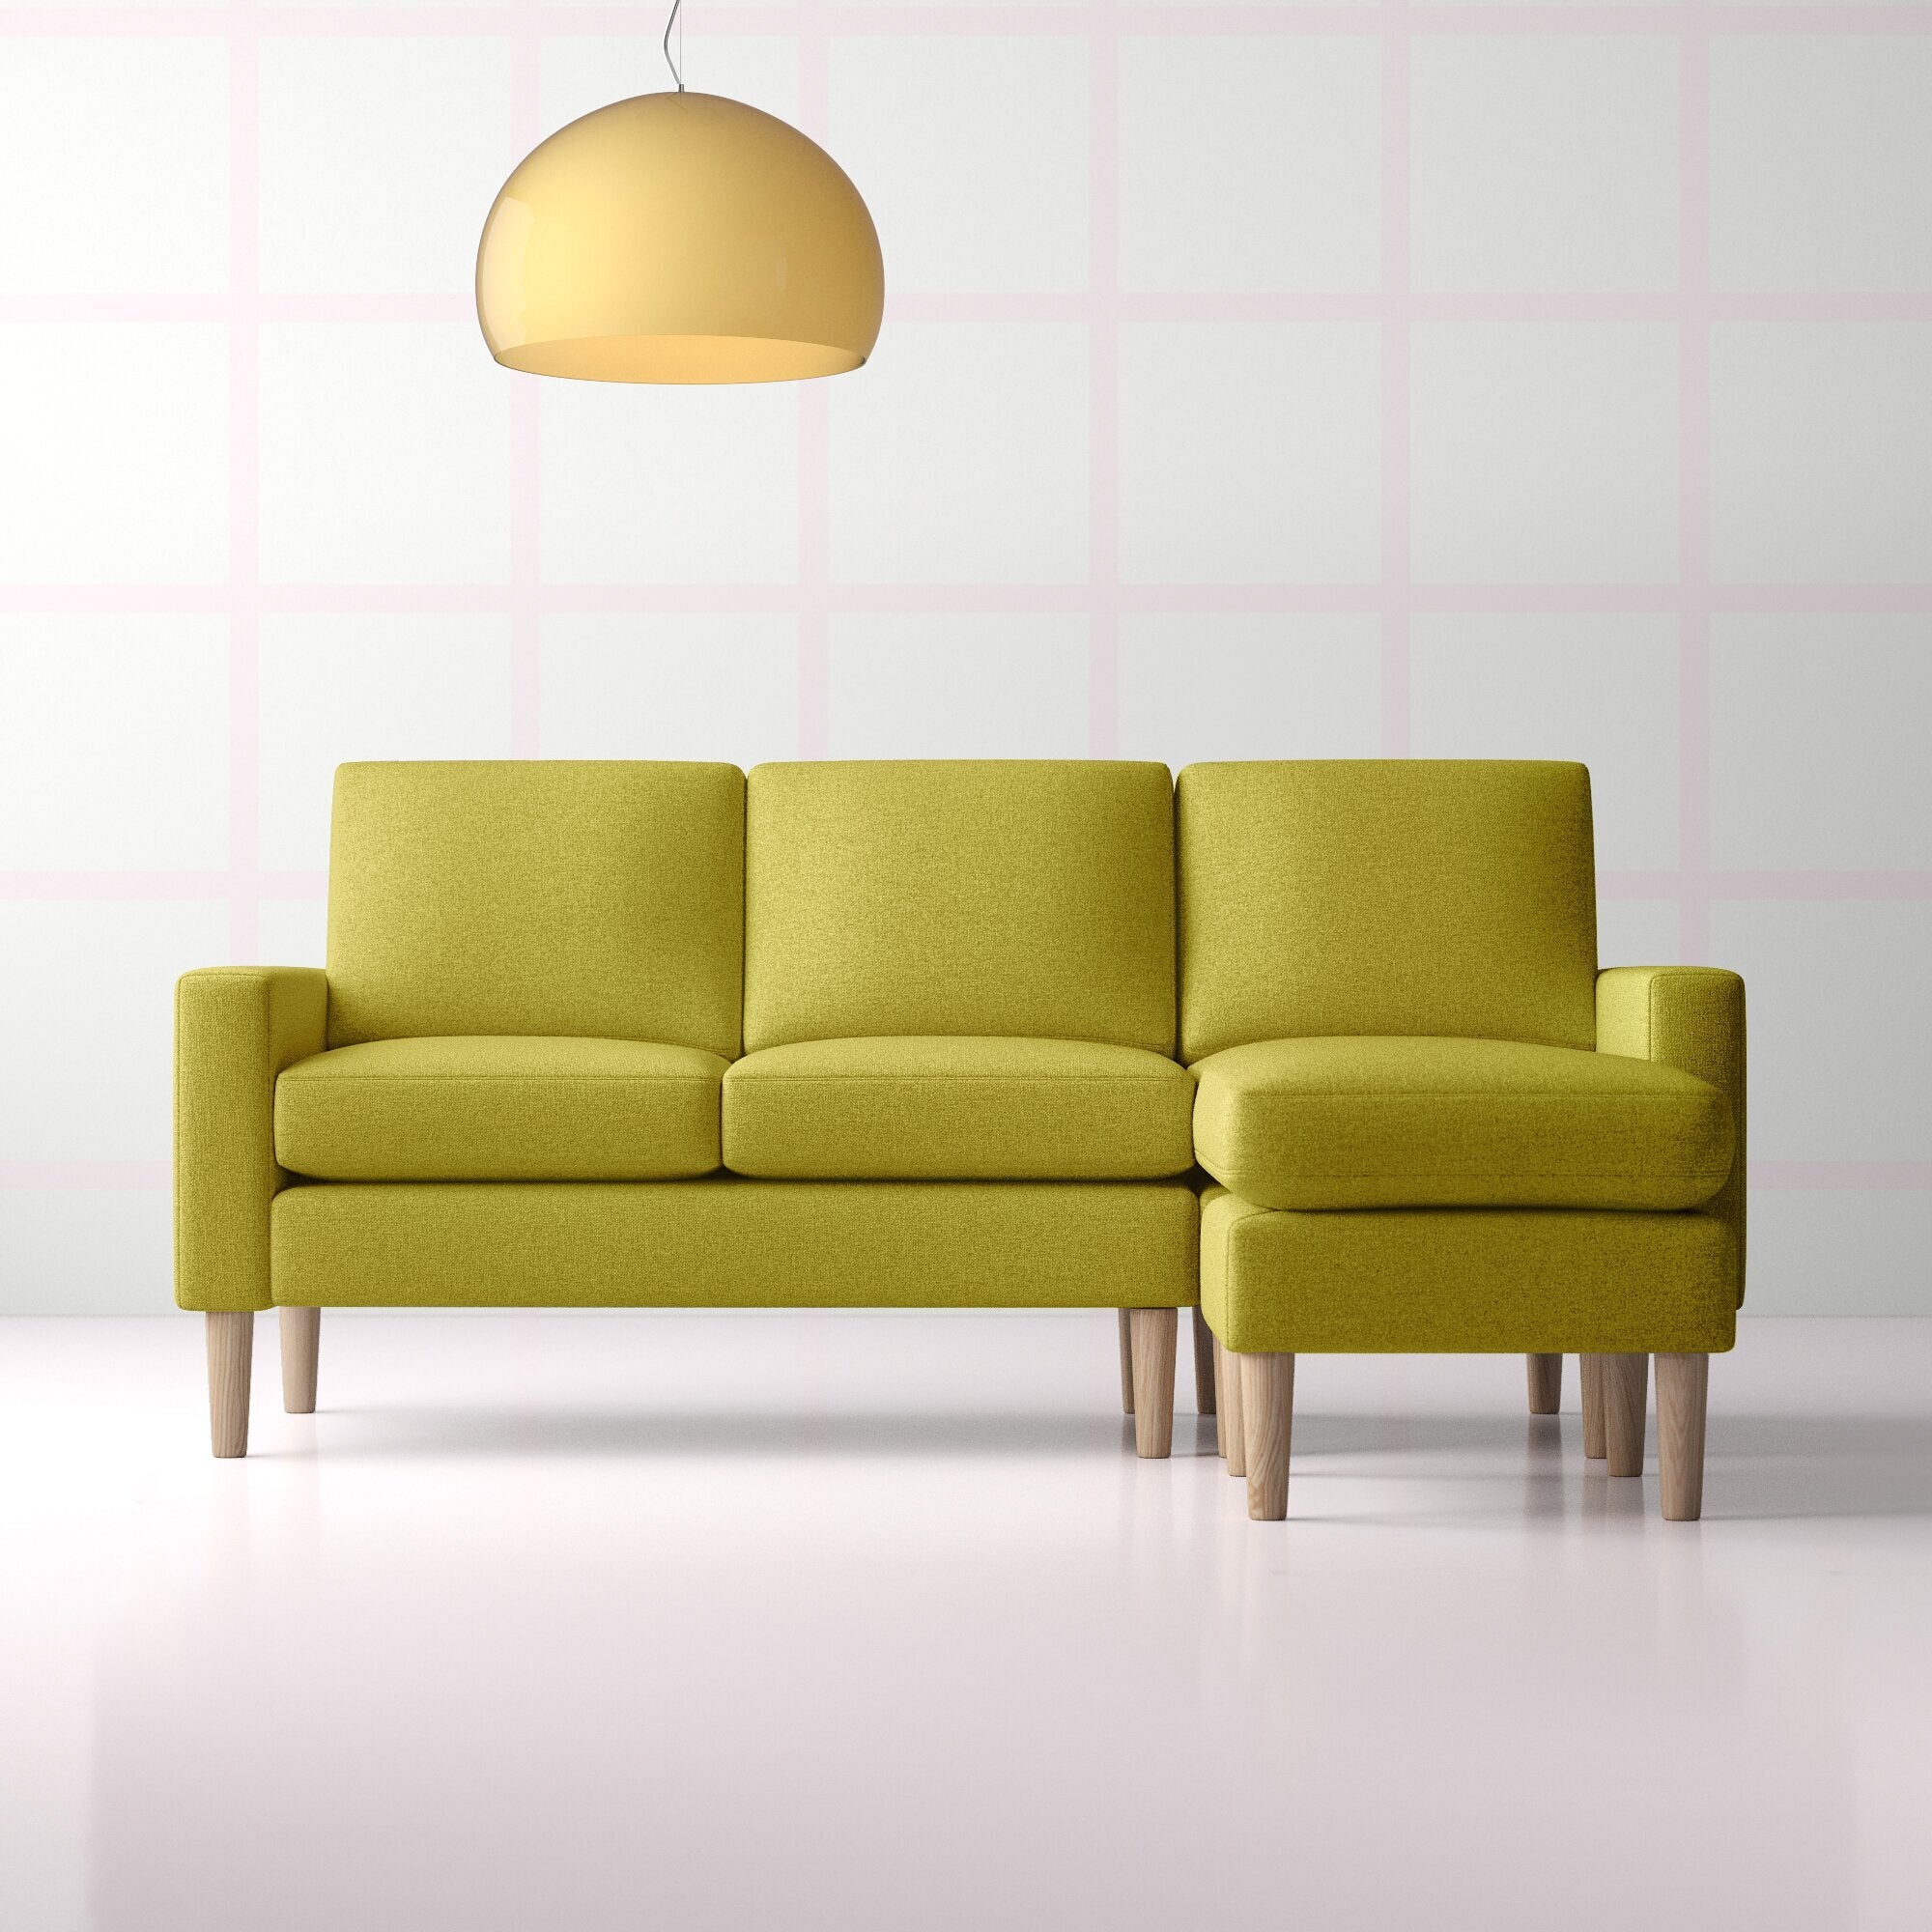 pickle colored sofa divided into thirds, with one side elongated for lounging 